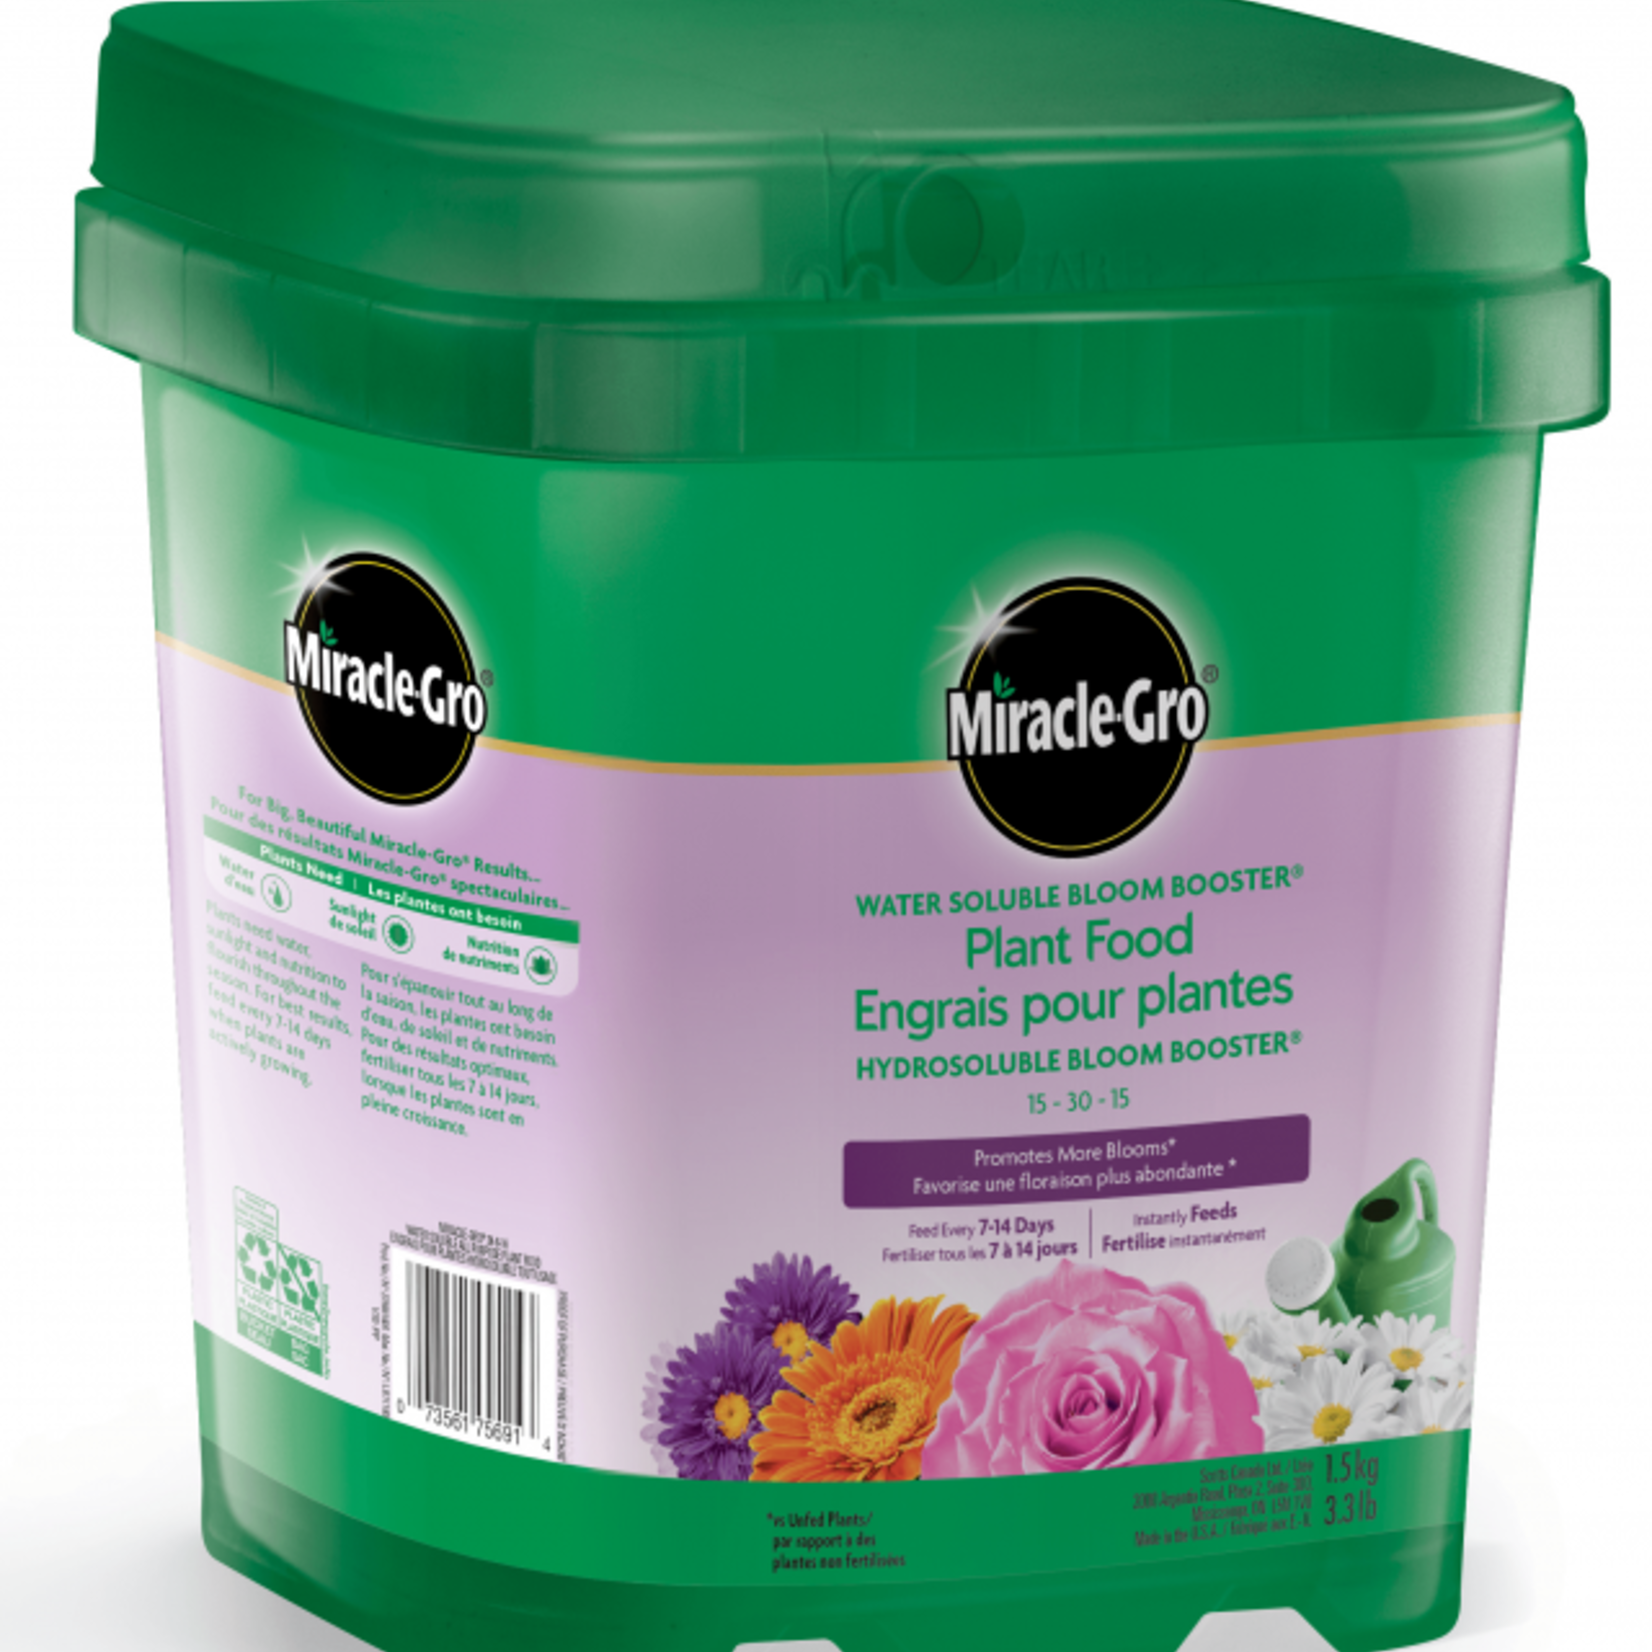 Miracle Gro Miracle-Gro Water Soluble Bloom Booster Plant Food 15-30-15 - 1.5 Kg